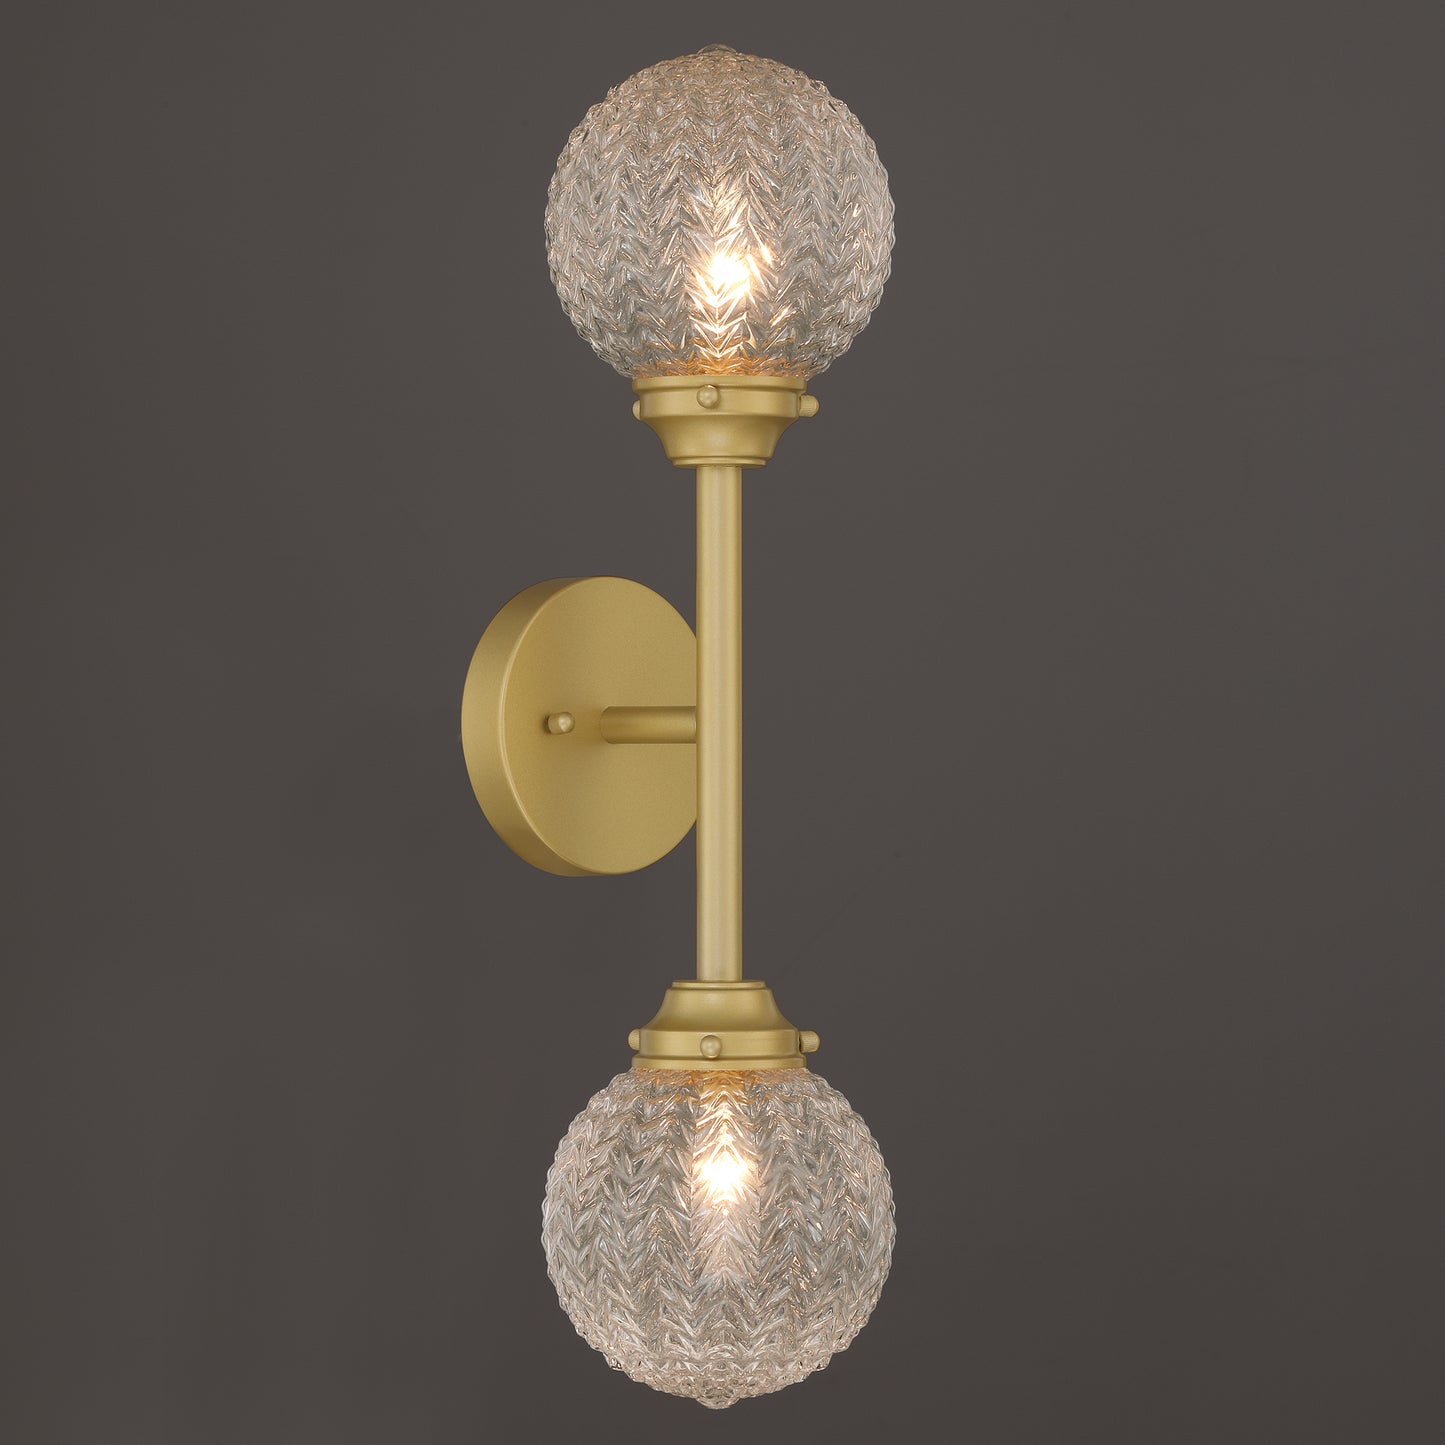 2 light gold glass wall sconce (8) by ACROMA